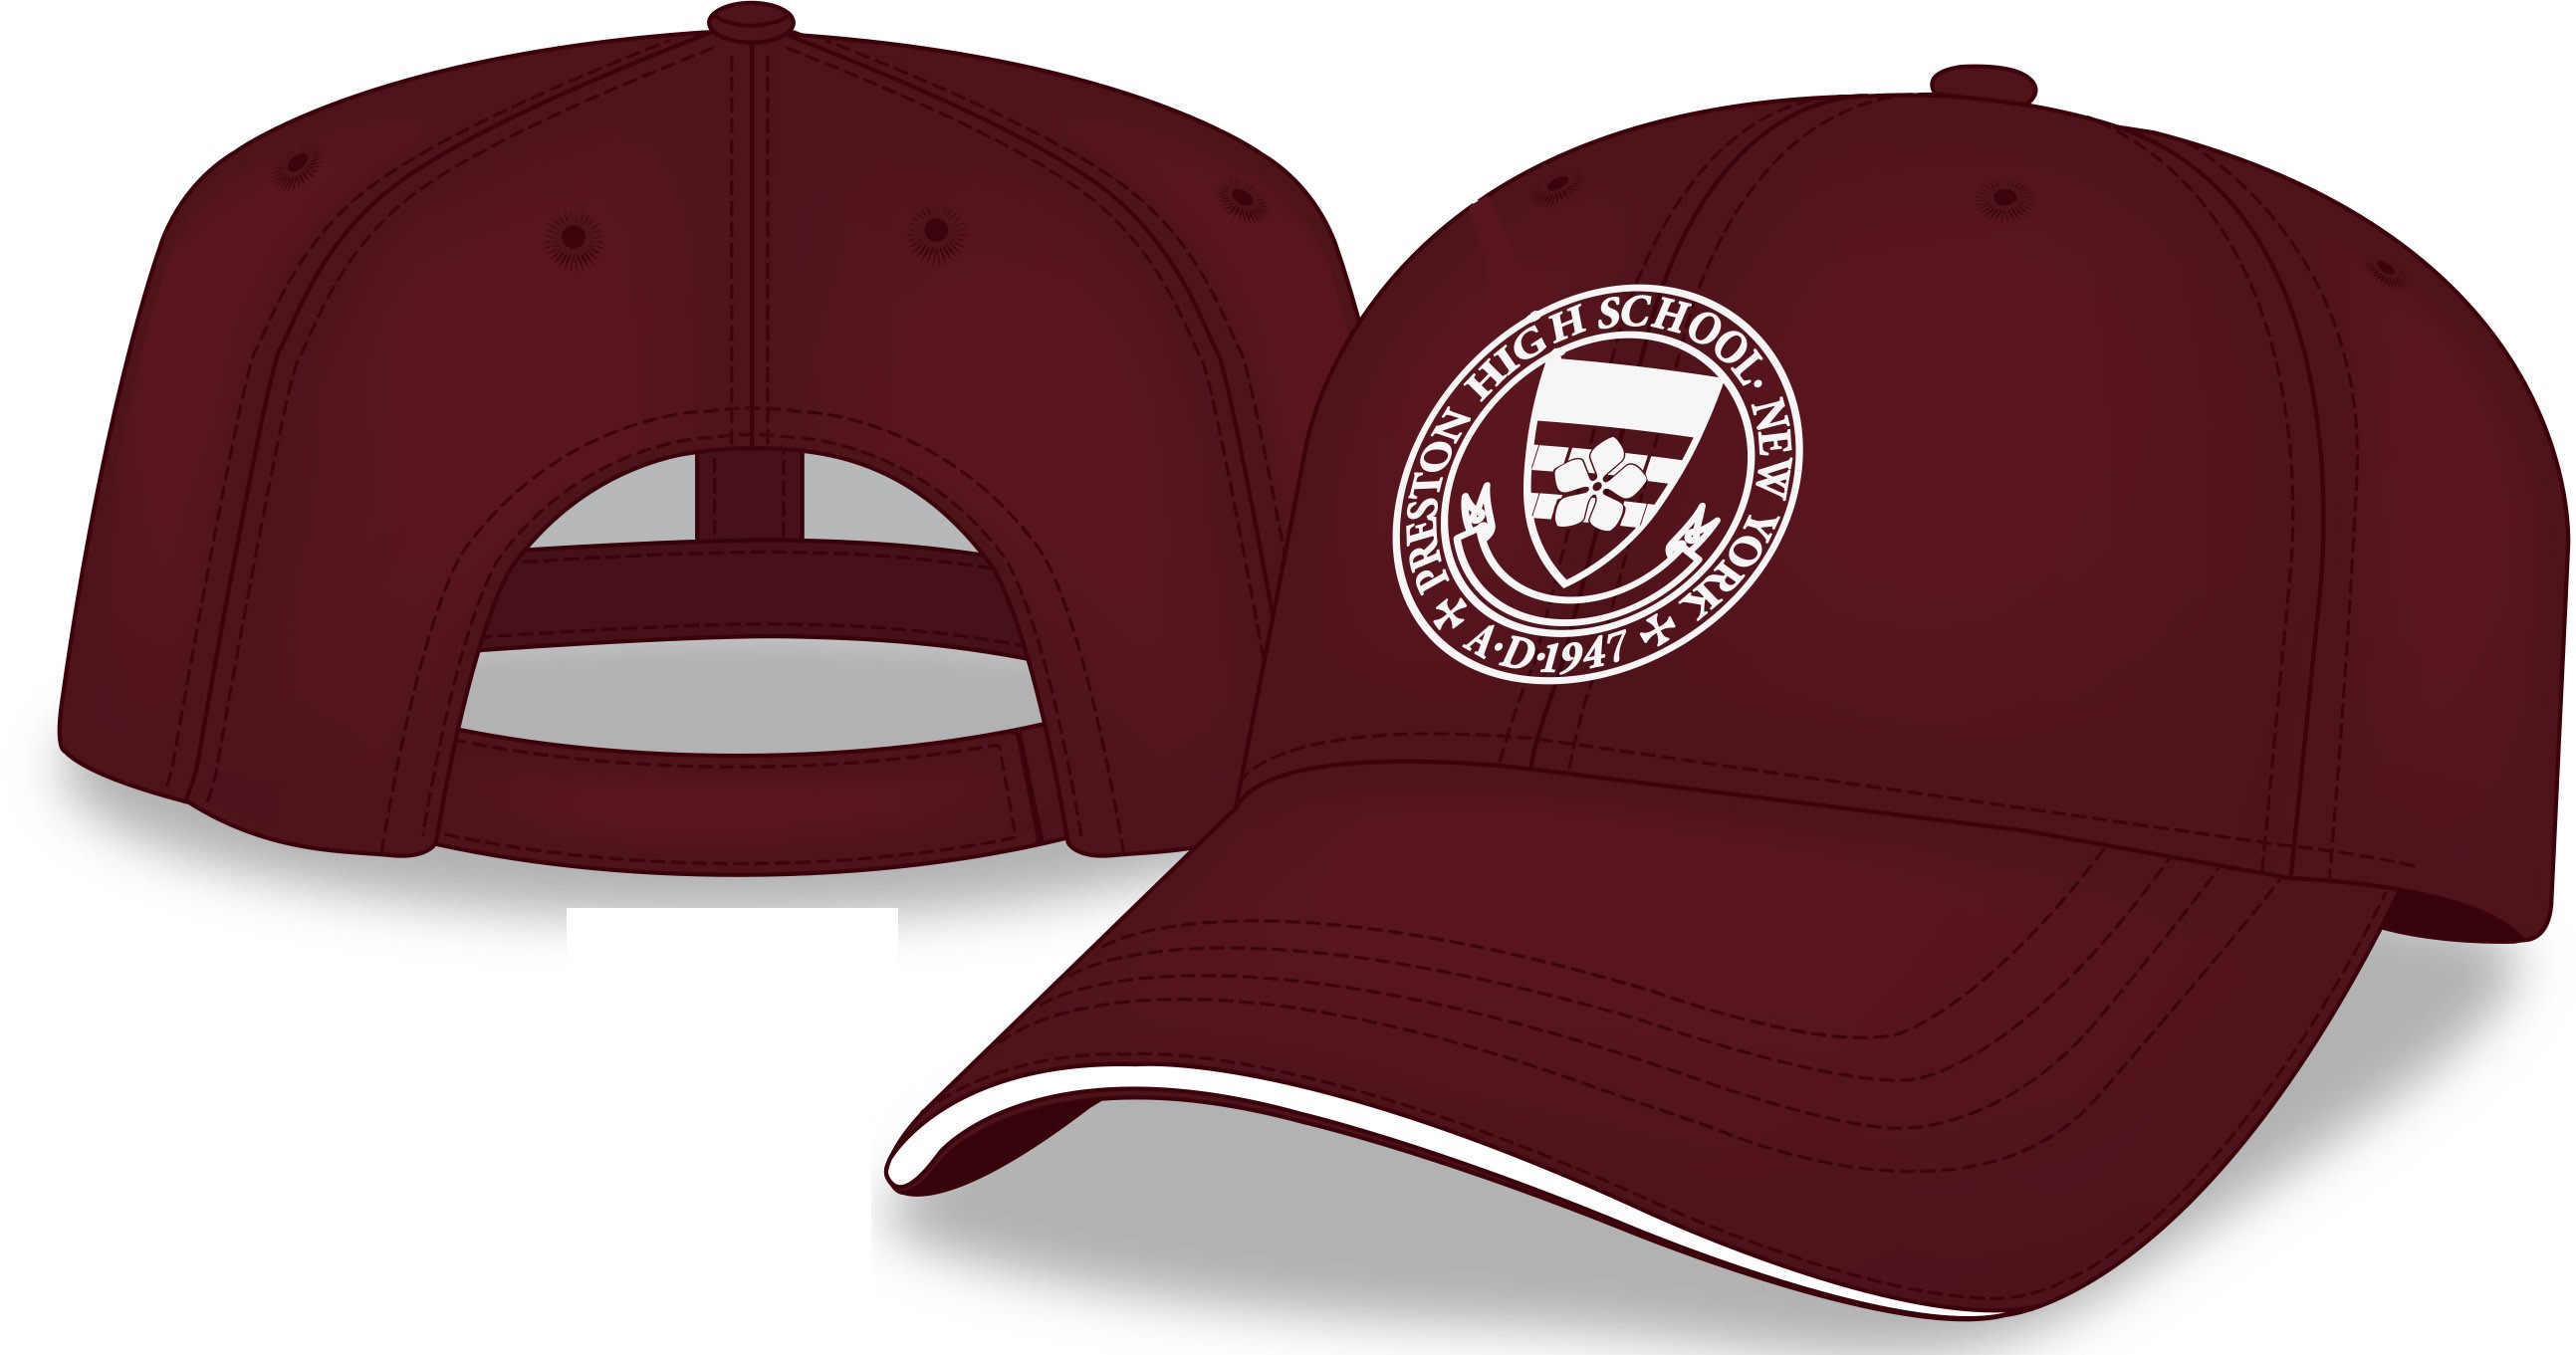 STAFF PHS Cap w/Logo - Please Allow 2-3 Weeks For Delivery 